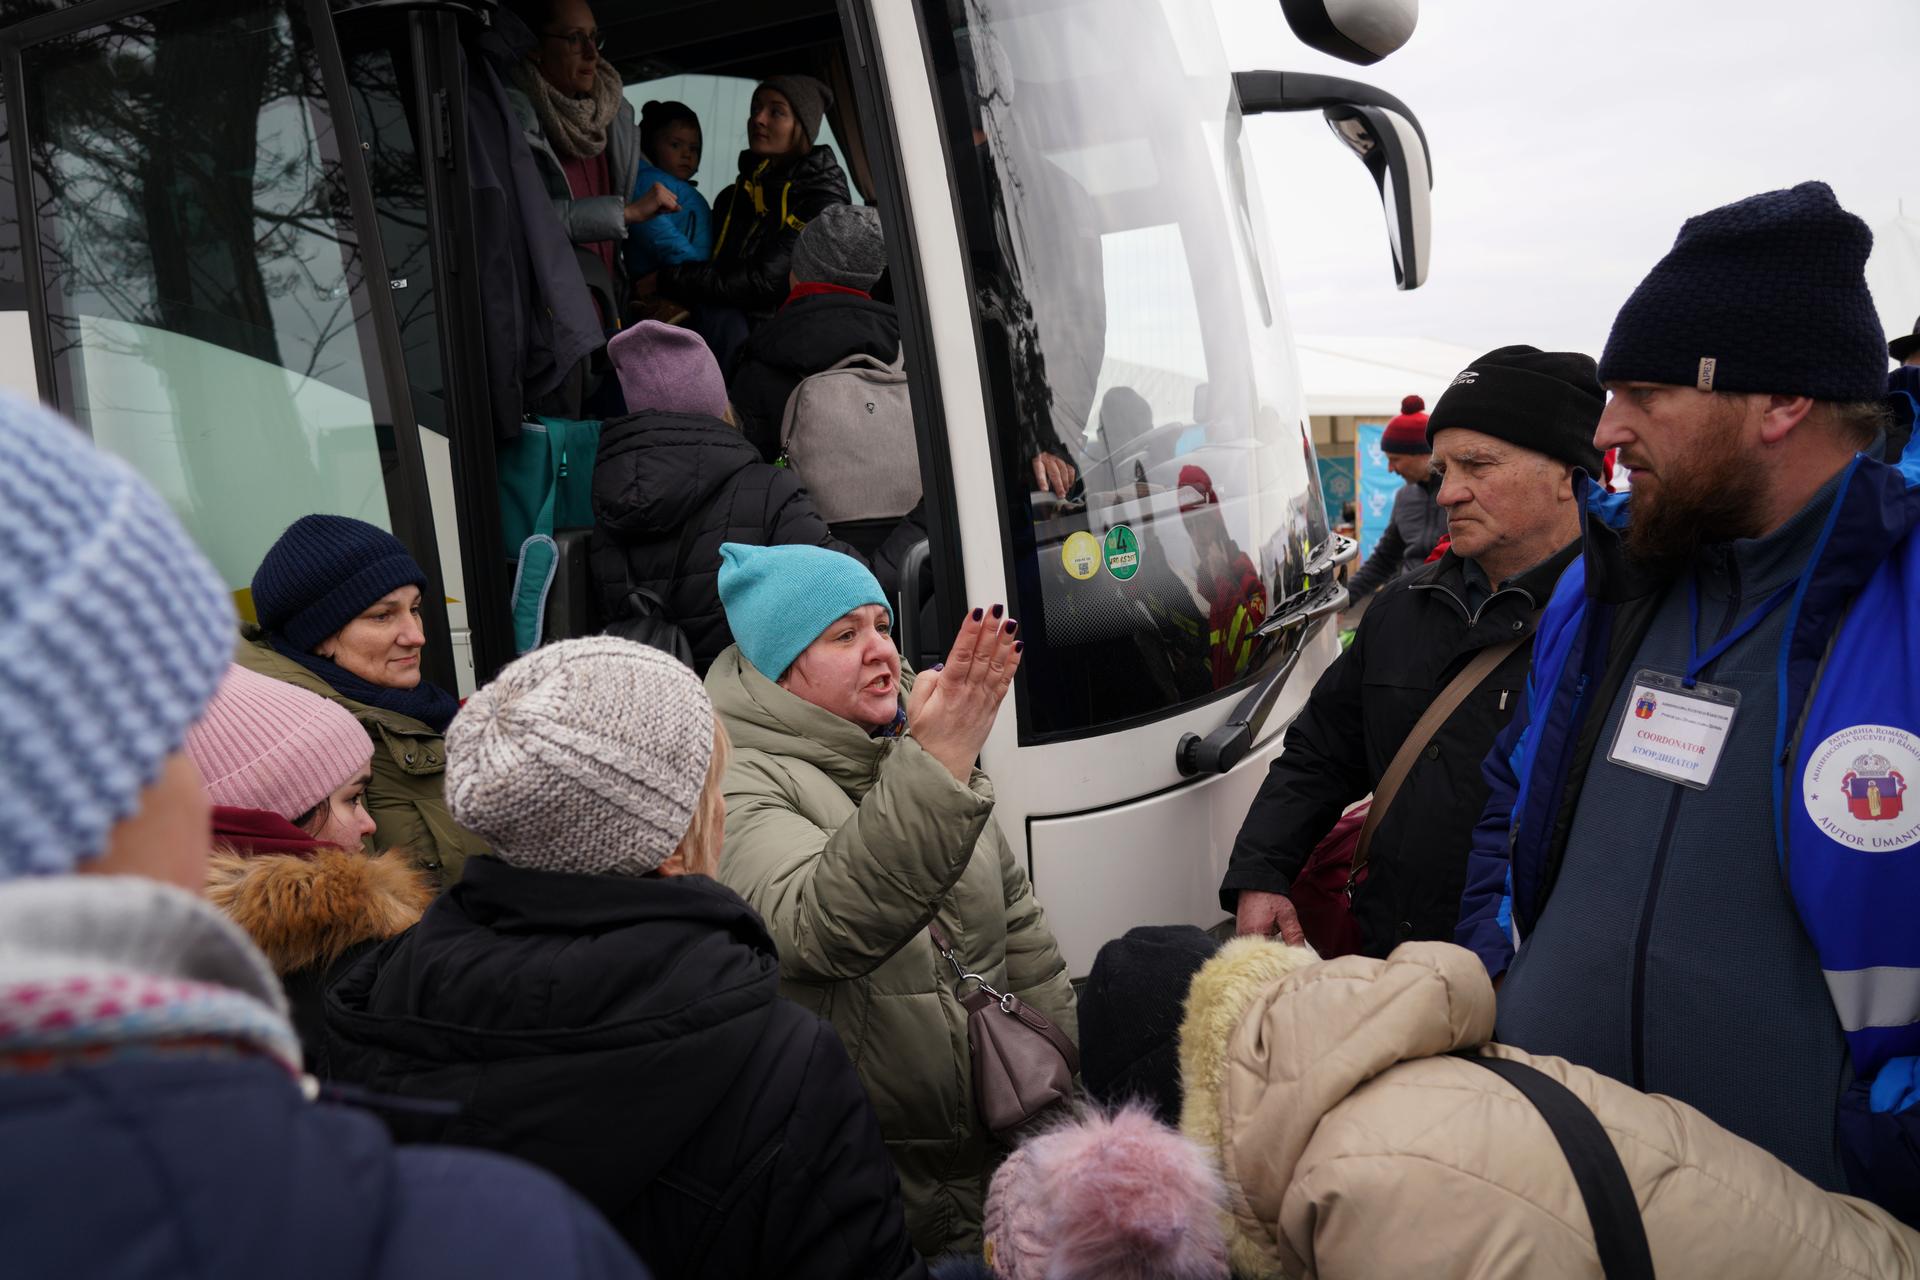 Amid a rush to board a bus to Berlin, one woman refugee from Ukraine panicked when she learned it was full but a volunteer assured her another was coming.